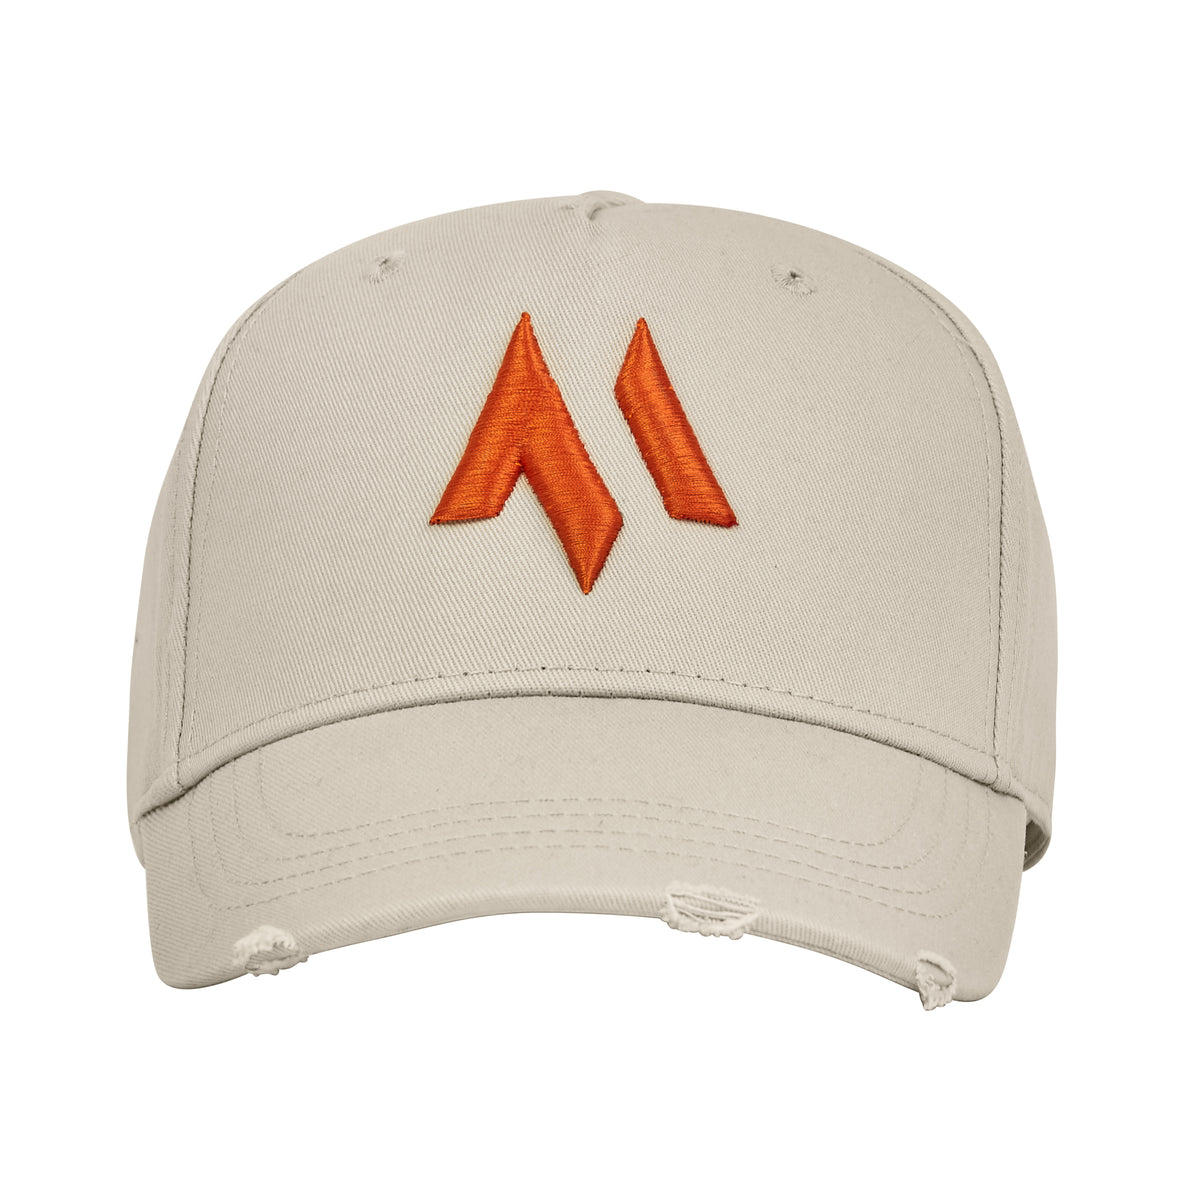 This is the new standard 3d distressed 5 panel in stone with an orange emblem. It is a large product image of the hat on a white background